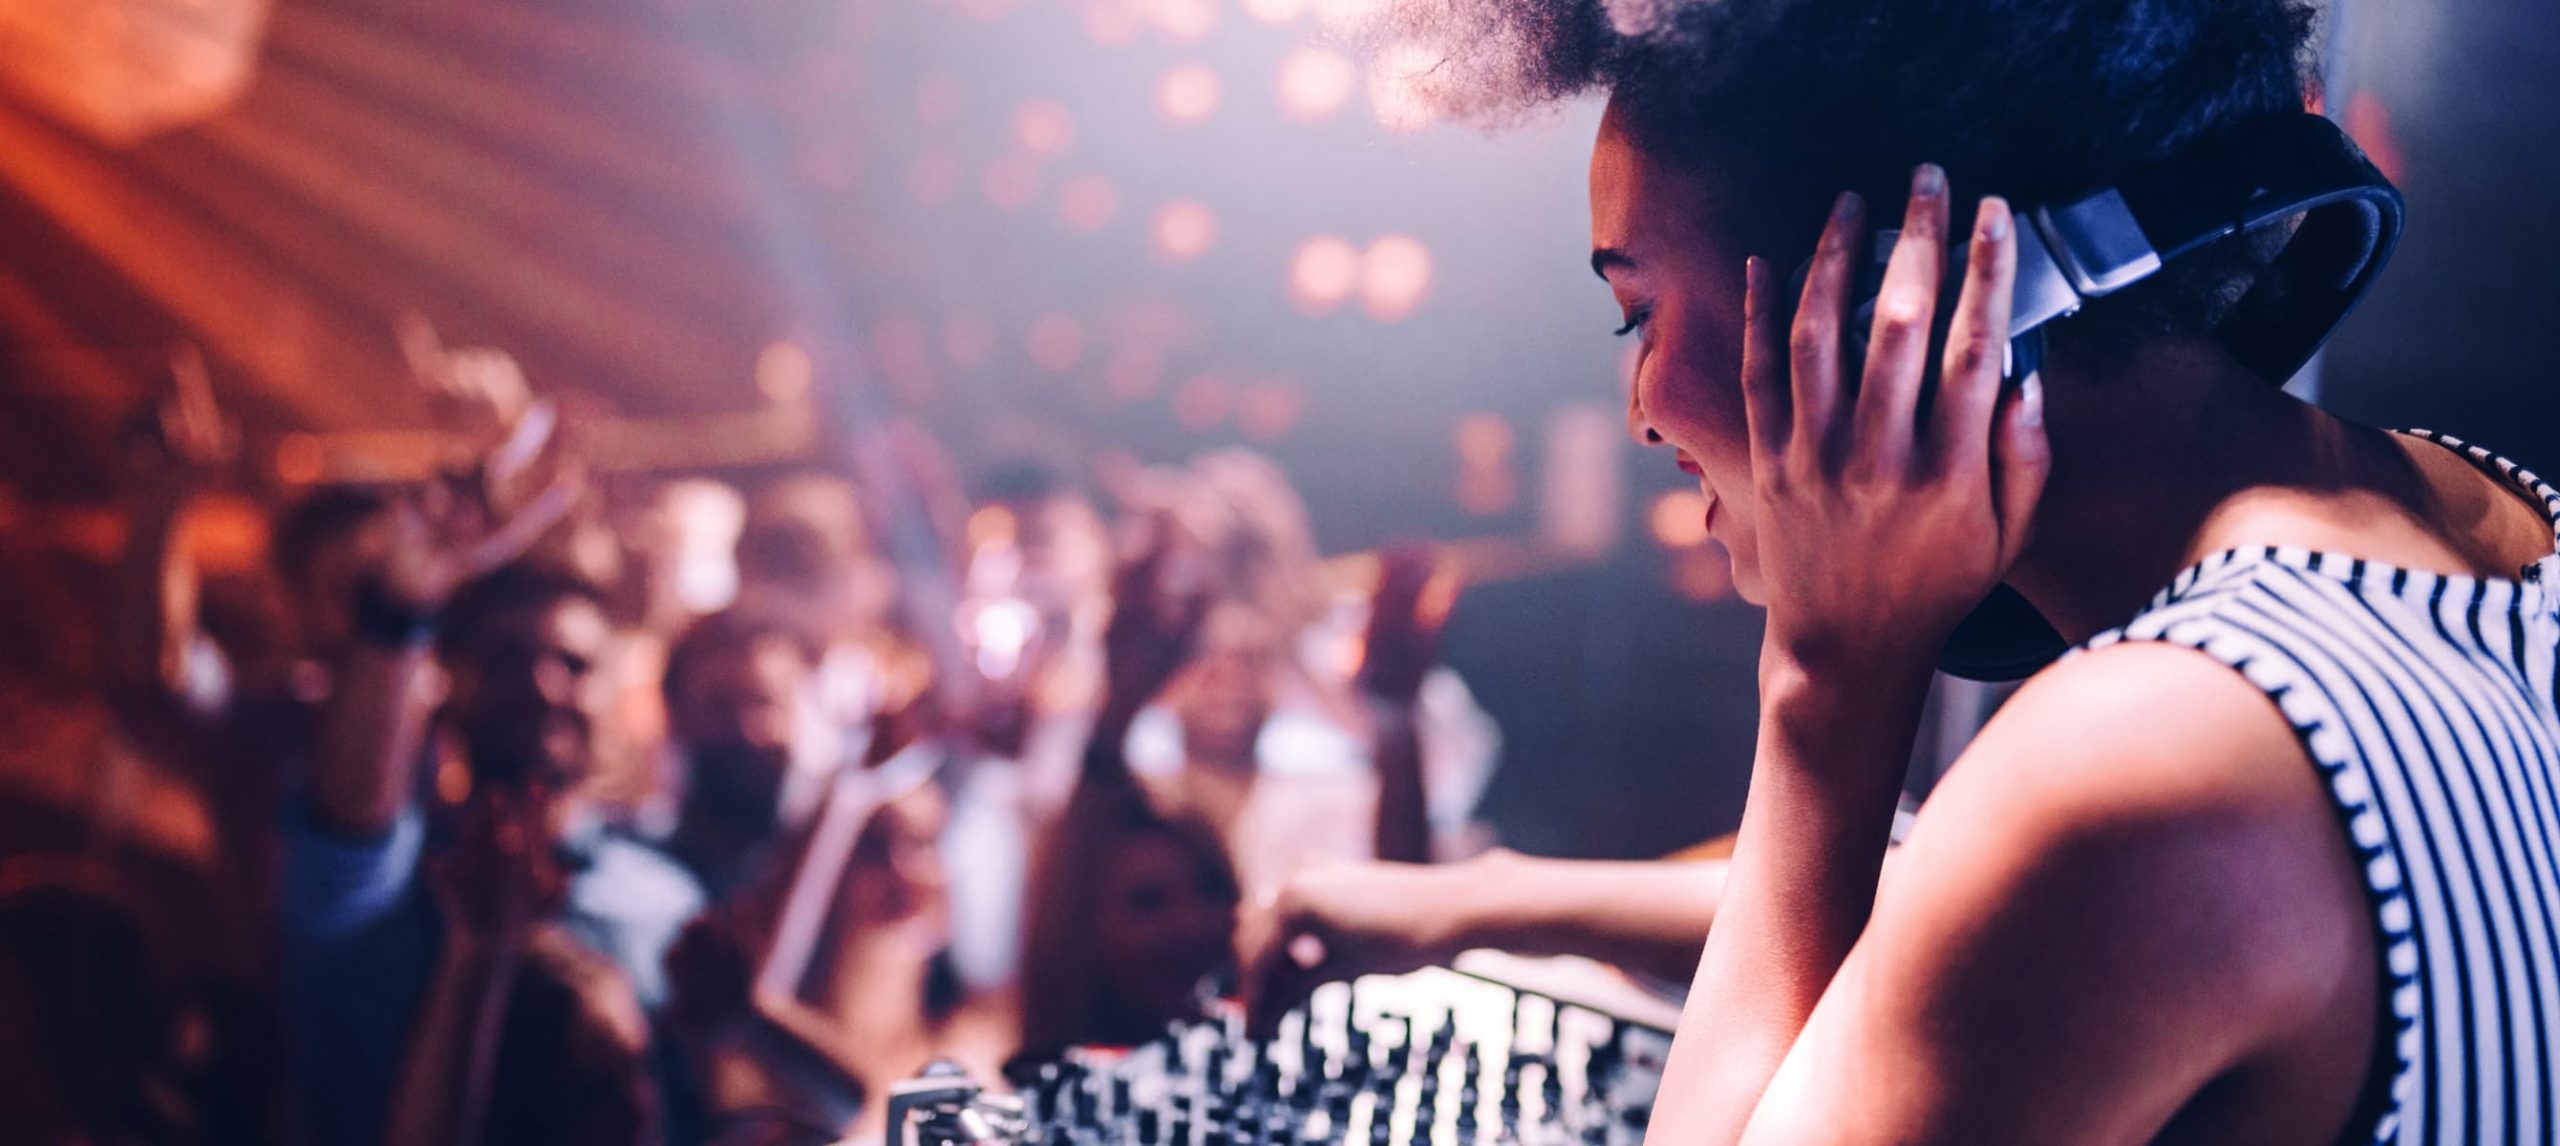 Young female DJ during her set at a nightclub party